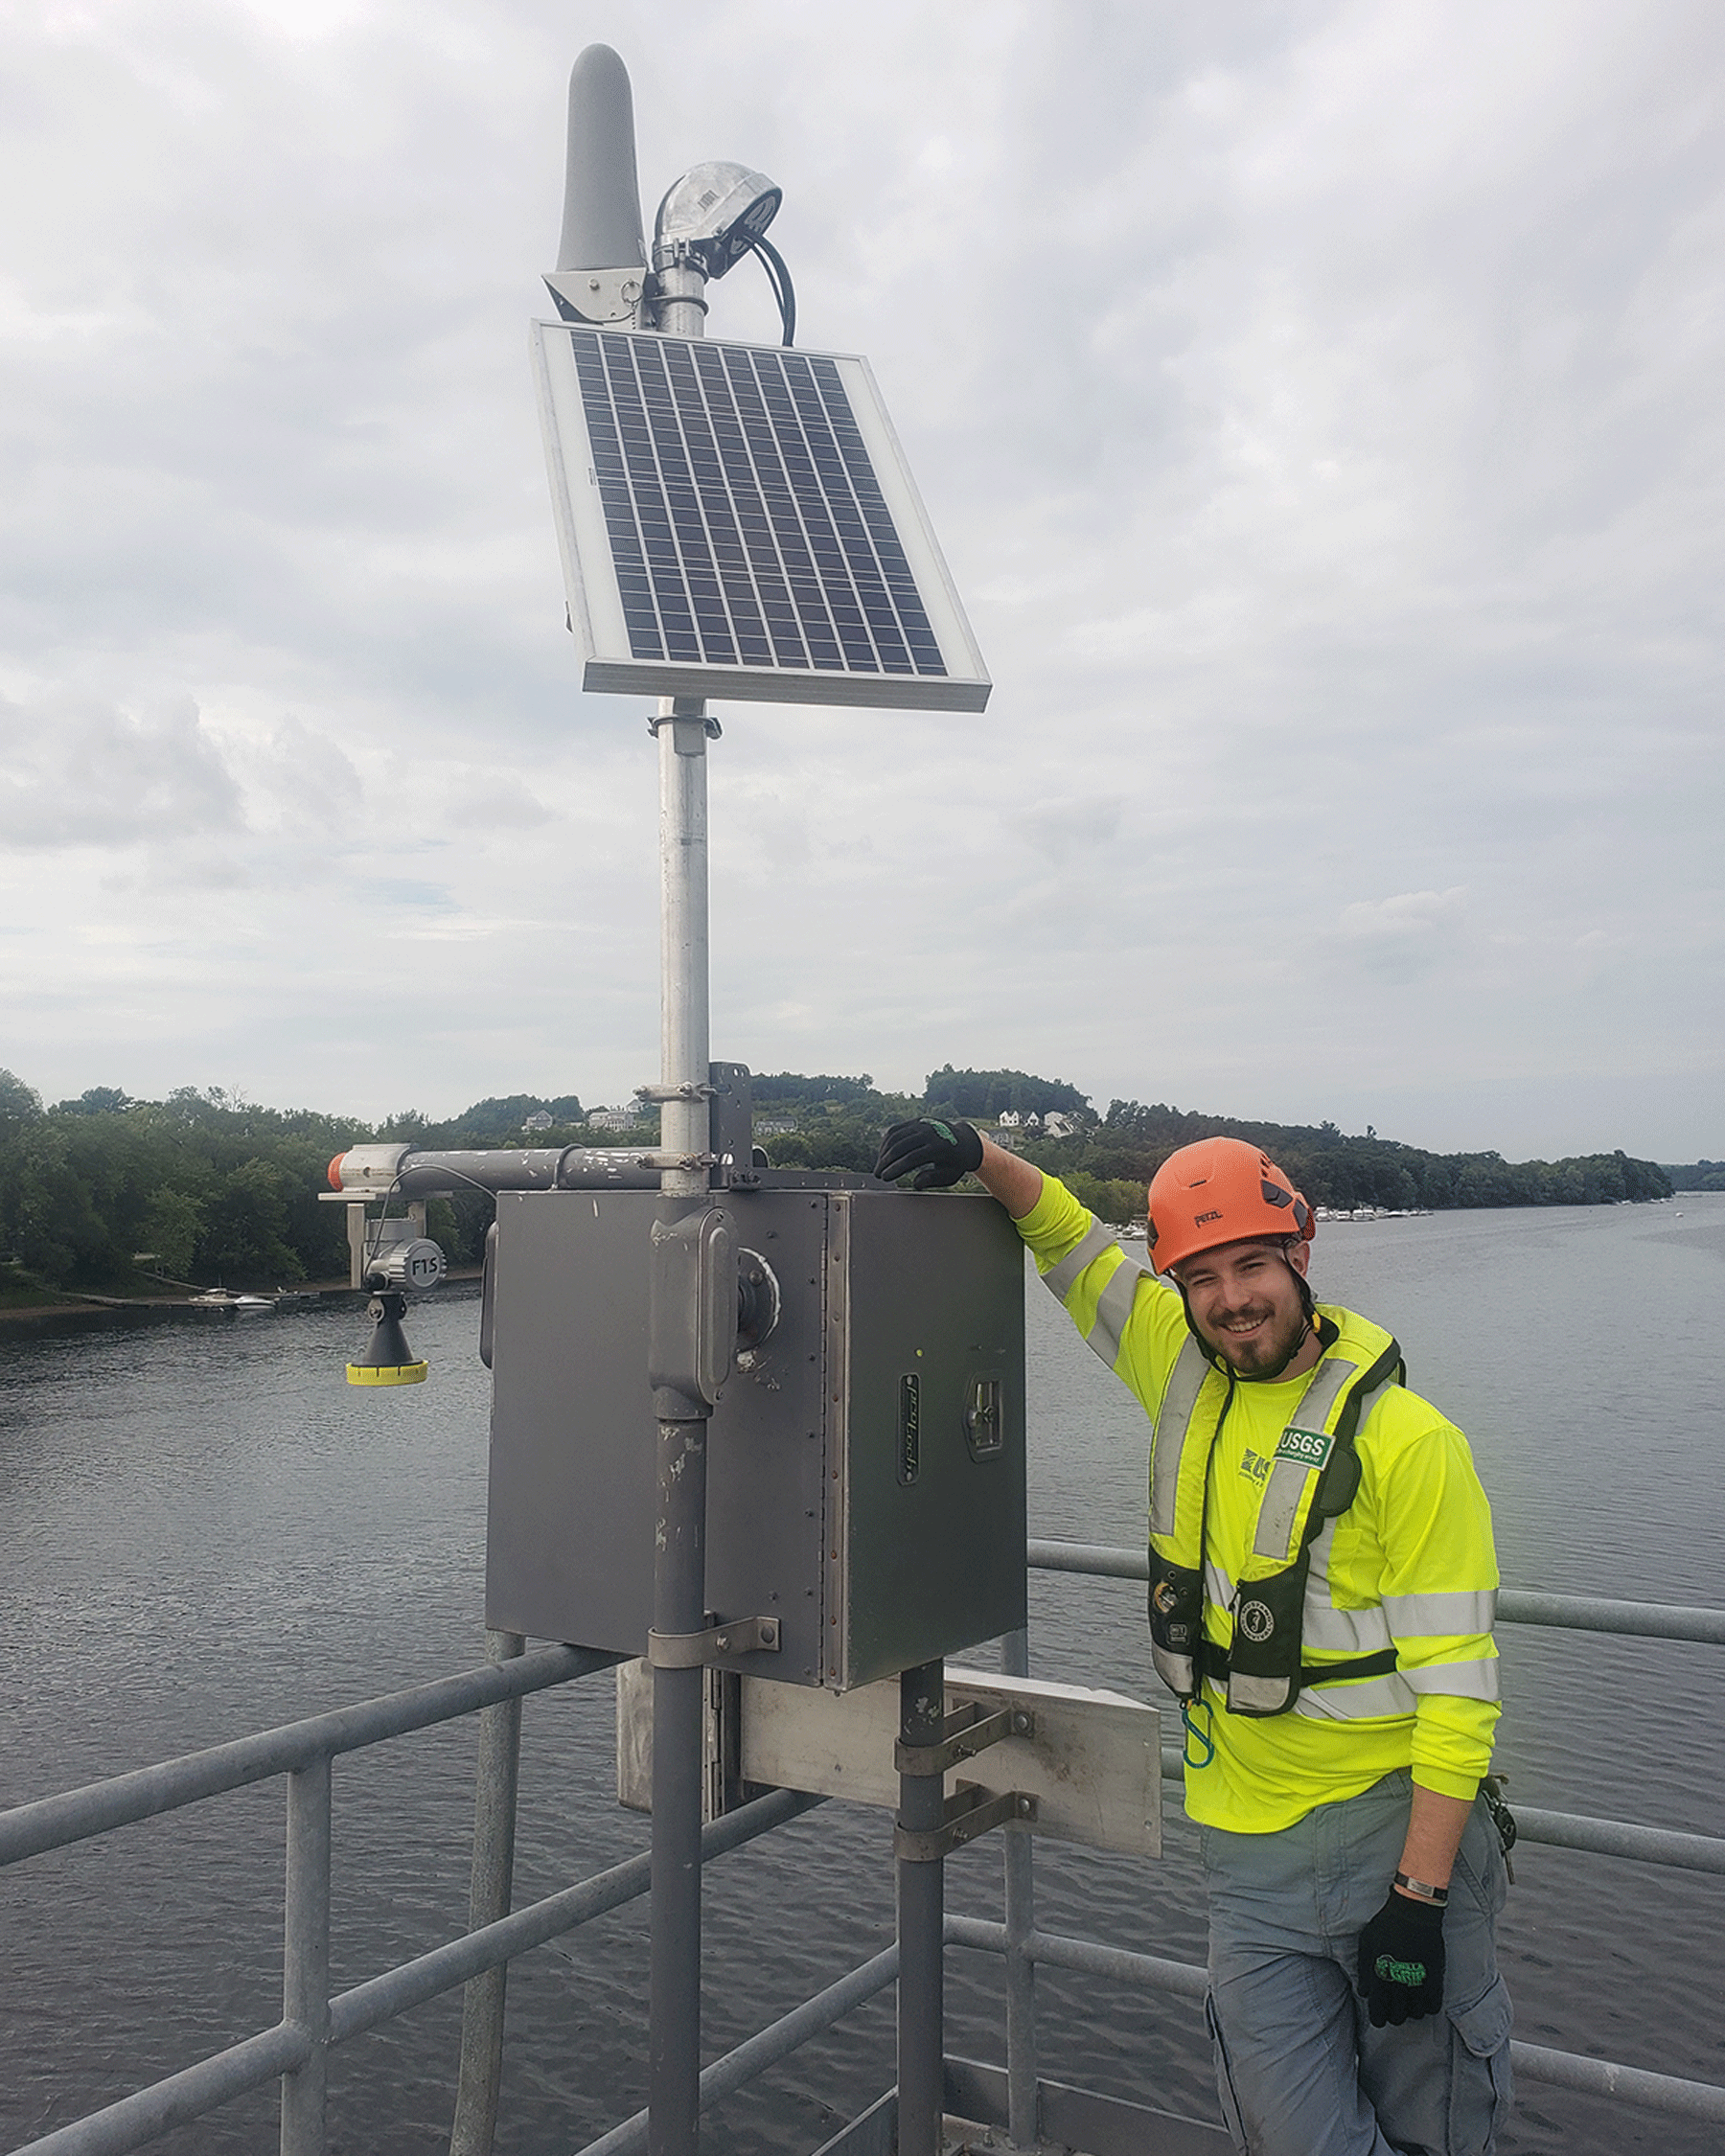 Photograph of an employee wearing high-visibility clothes and a helmet. He is above
                     a water body, smiling, and leaning on a metal box with a solar panel.